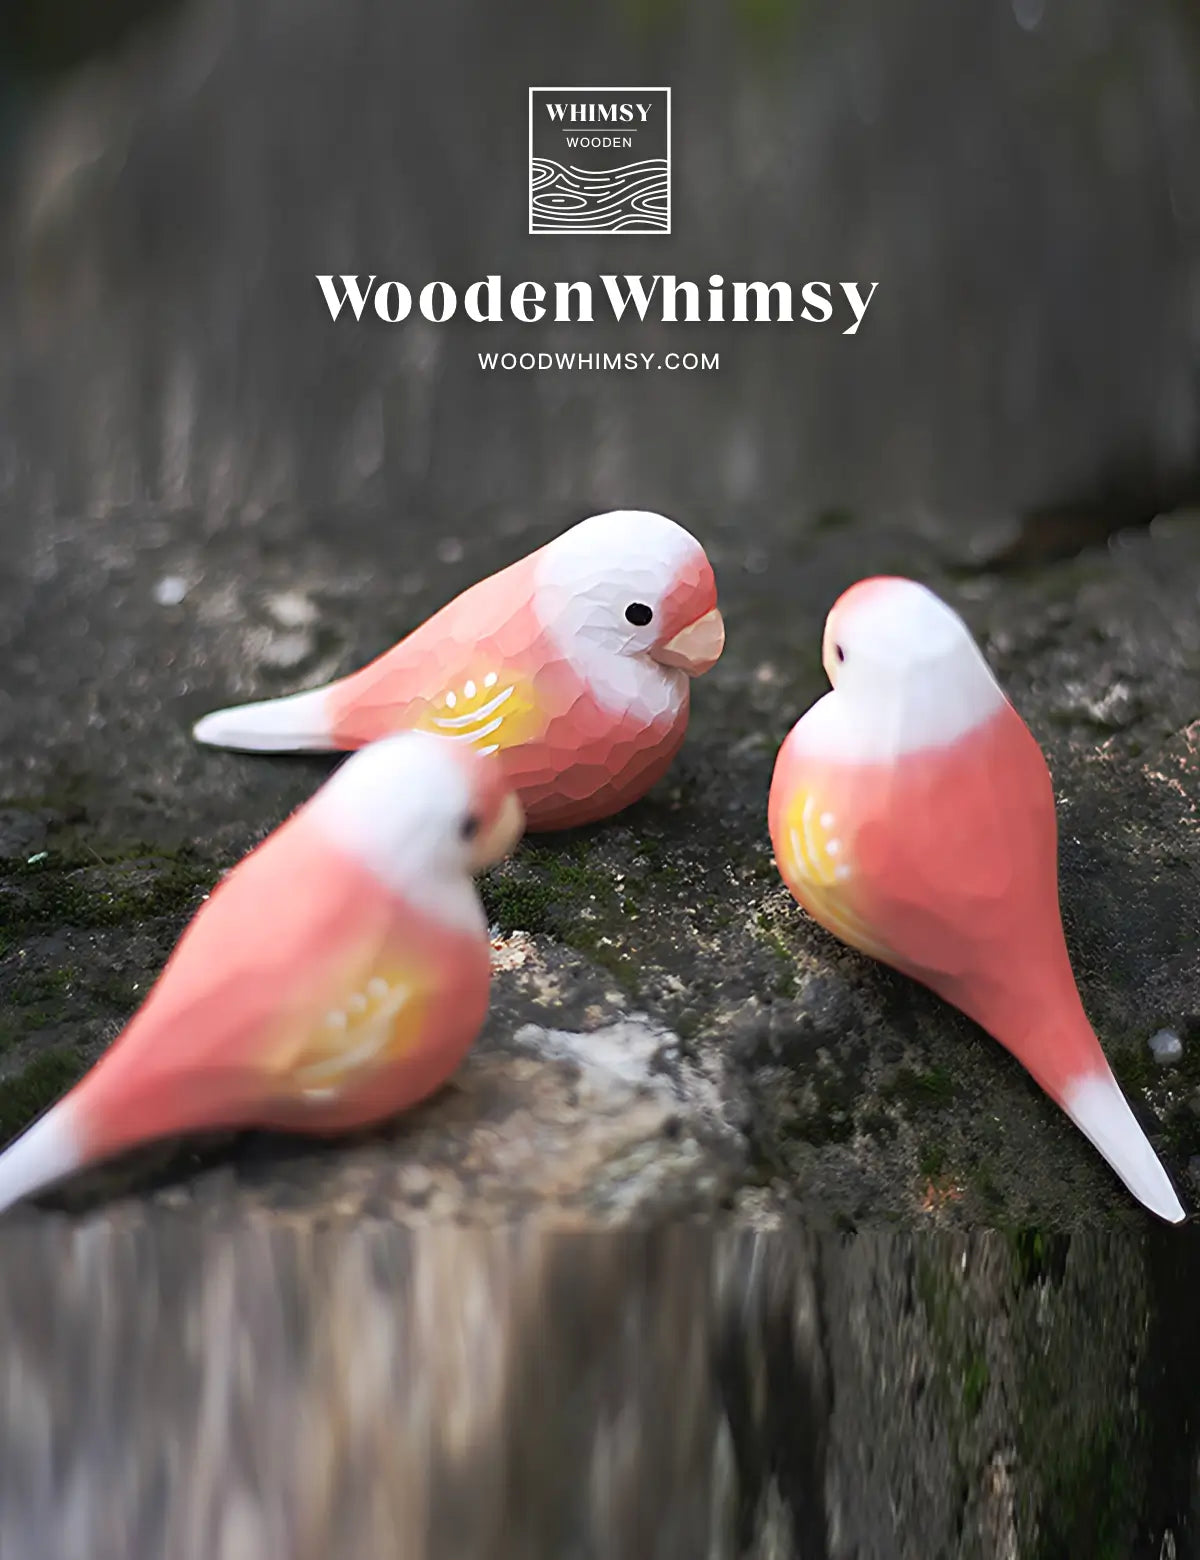 alt="Handcrafted Pink Parakeet Wooden Bird by WoodenWhimsy - Exquisite Home Ornament" - 05